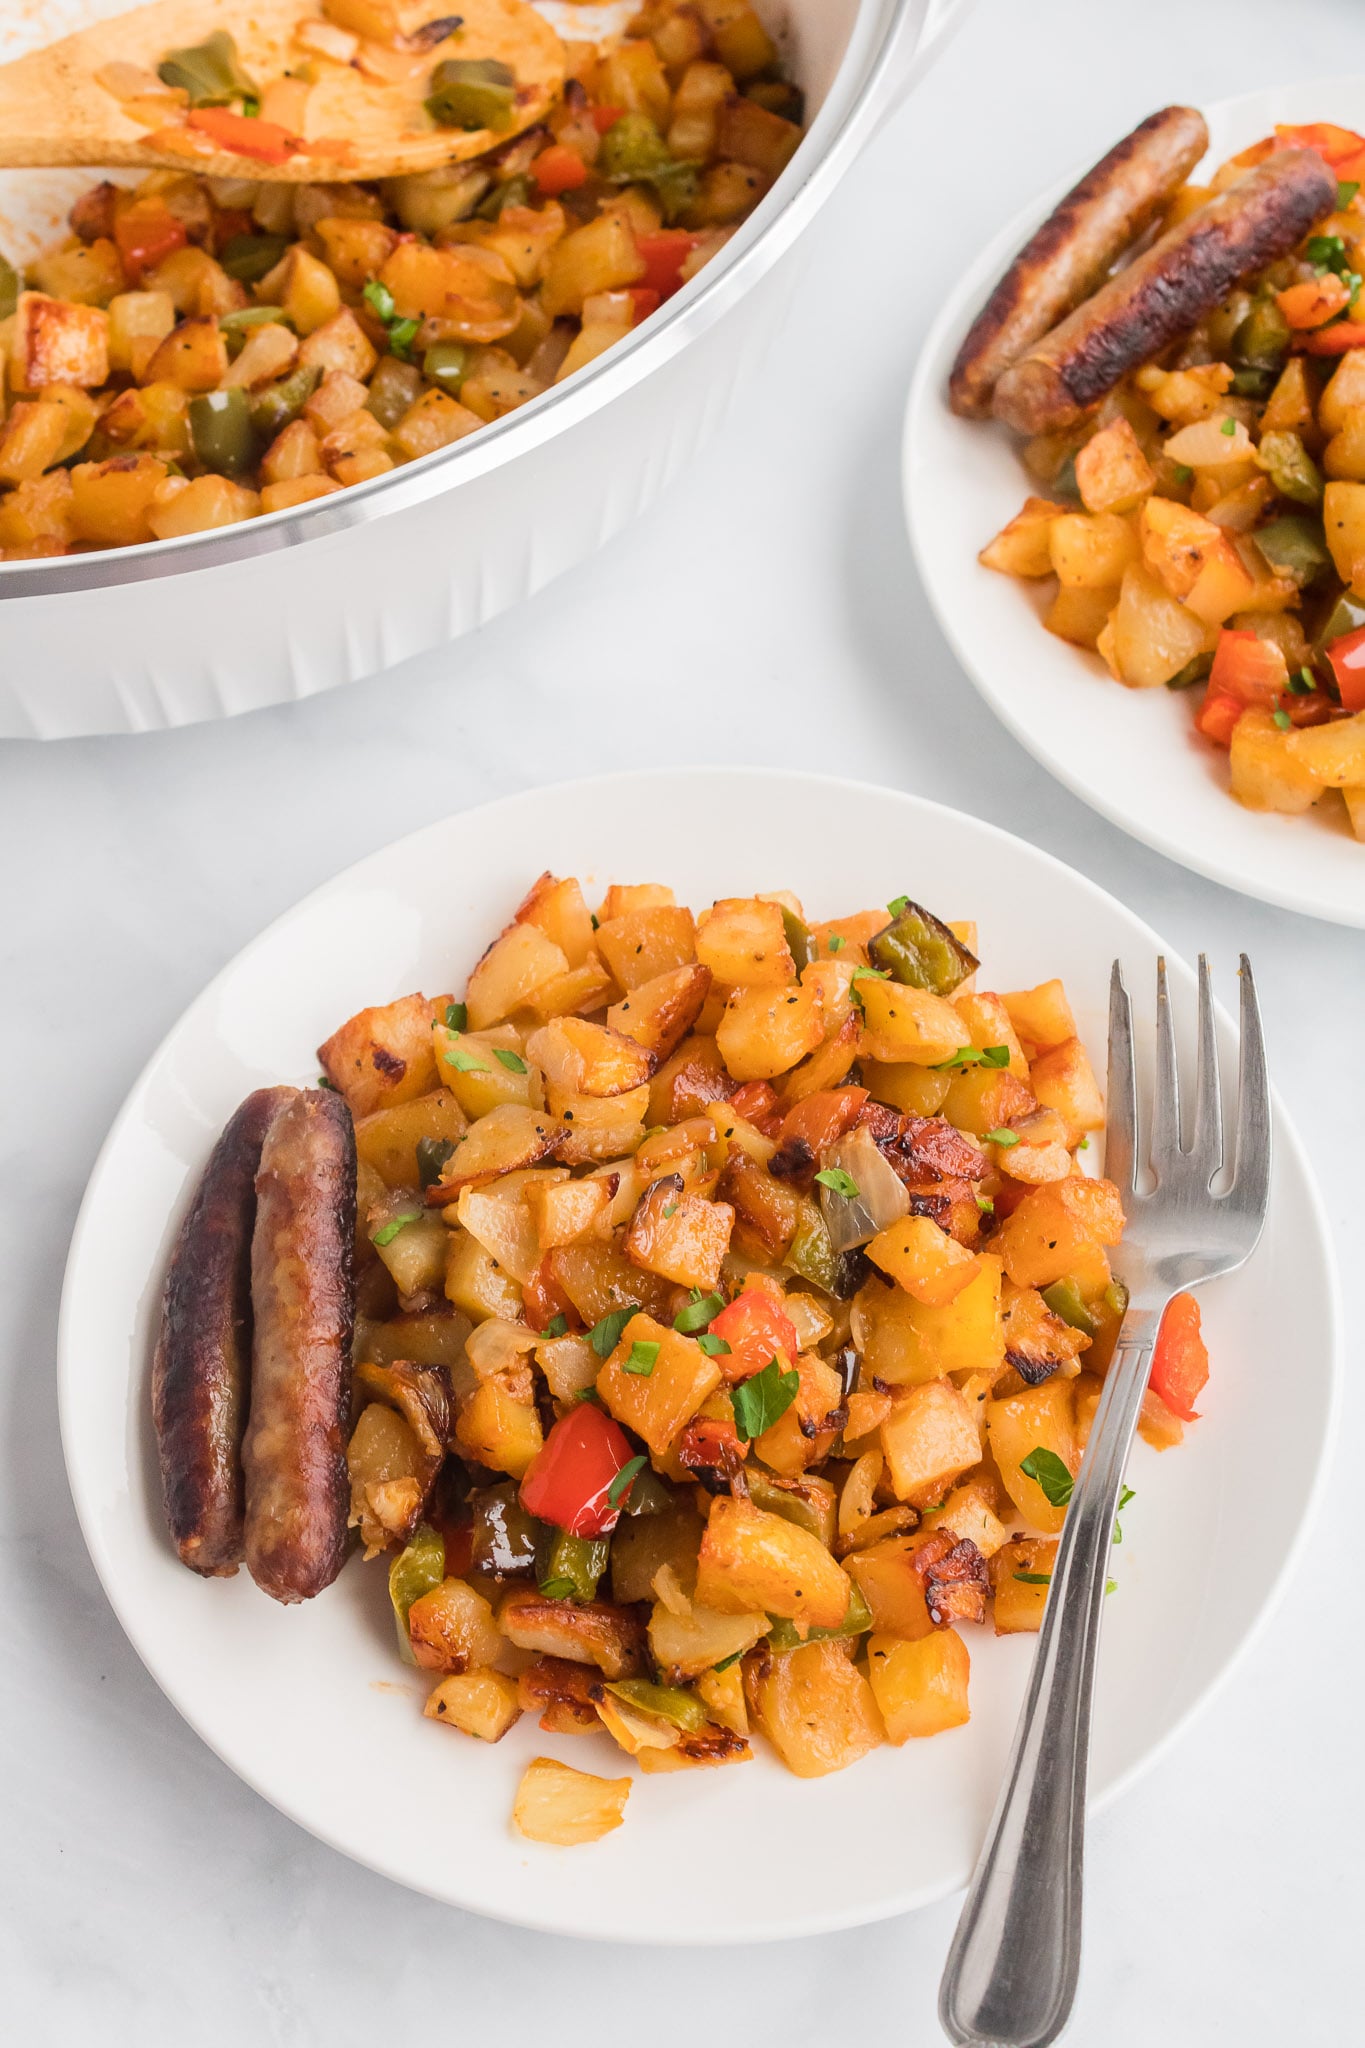 Crispy Breakfast Potatoes With Peppers and Onions